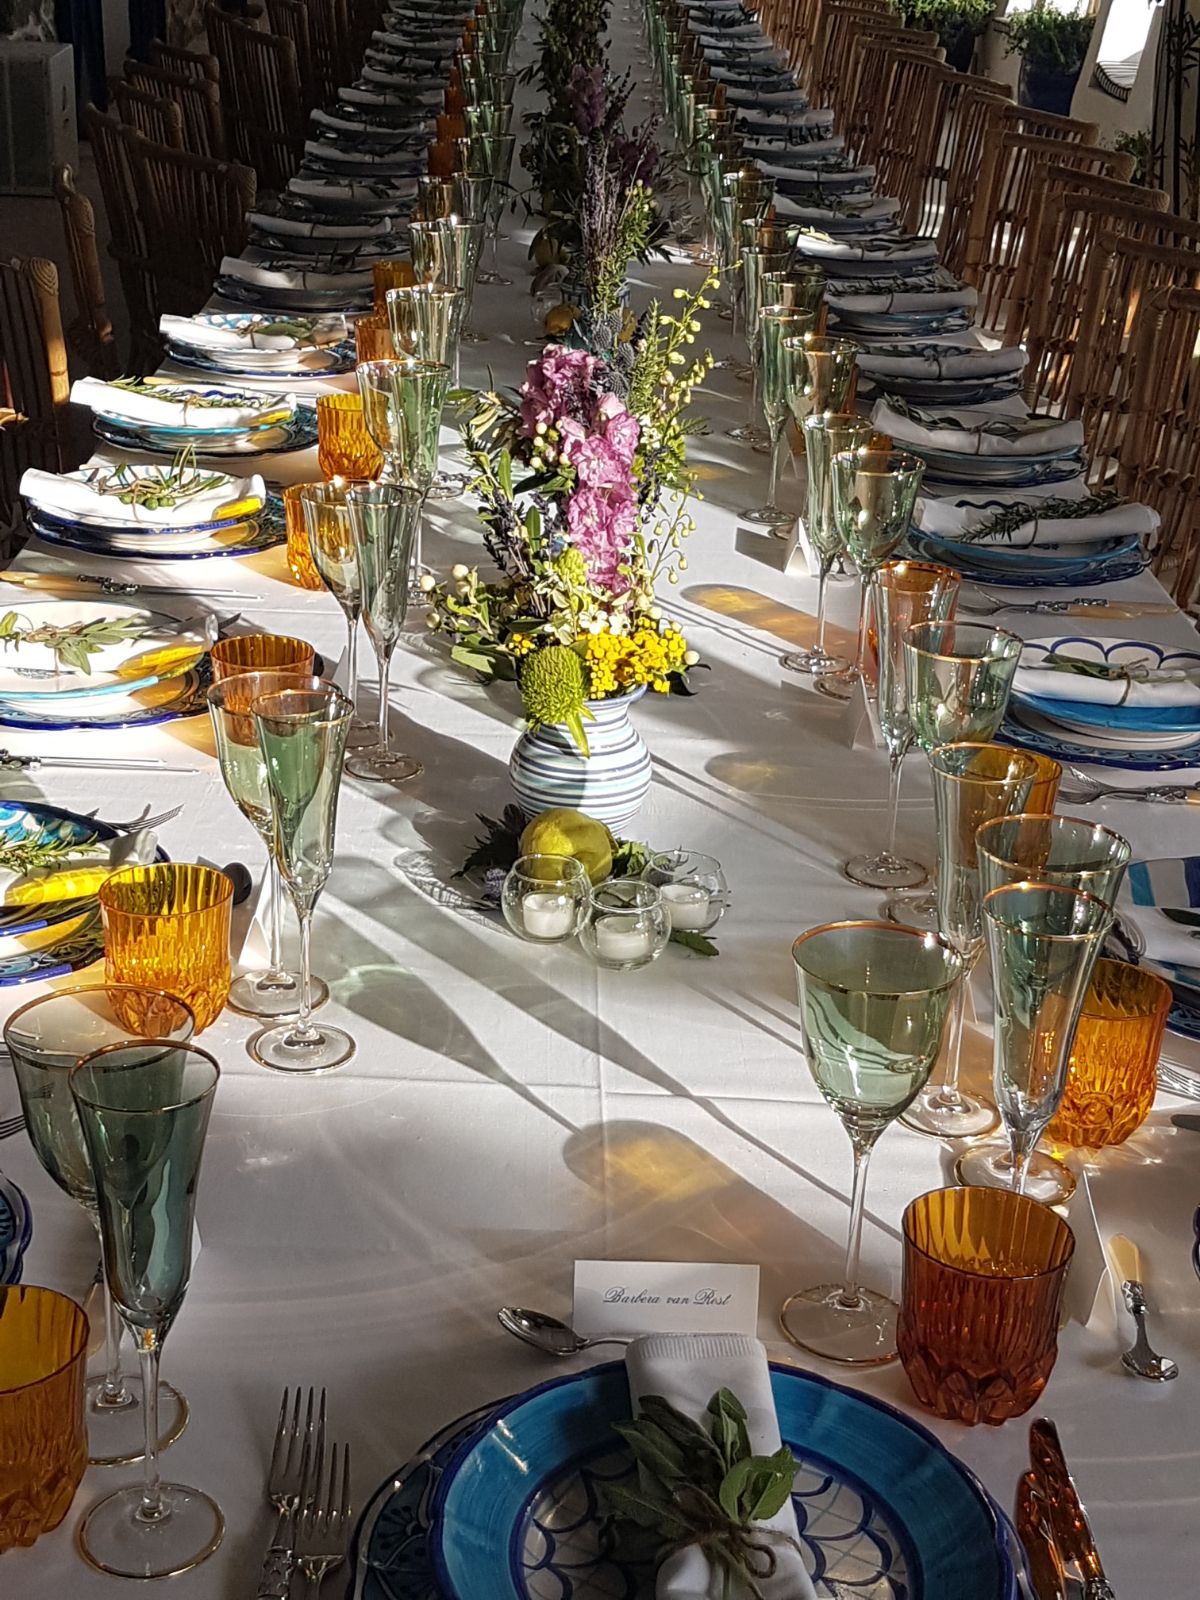 https://www.weddingamalfi.com/wp-content/uploads/Anna-and-Charles-wedding-table-colorful-decorations-with-flowers-centerpiece-and-place-cards.jpg